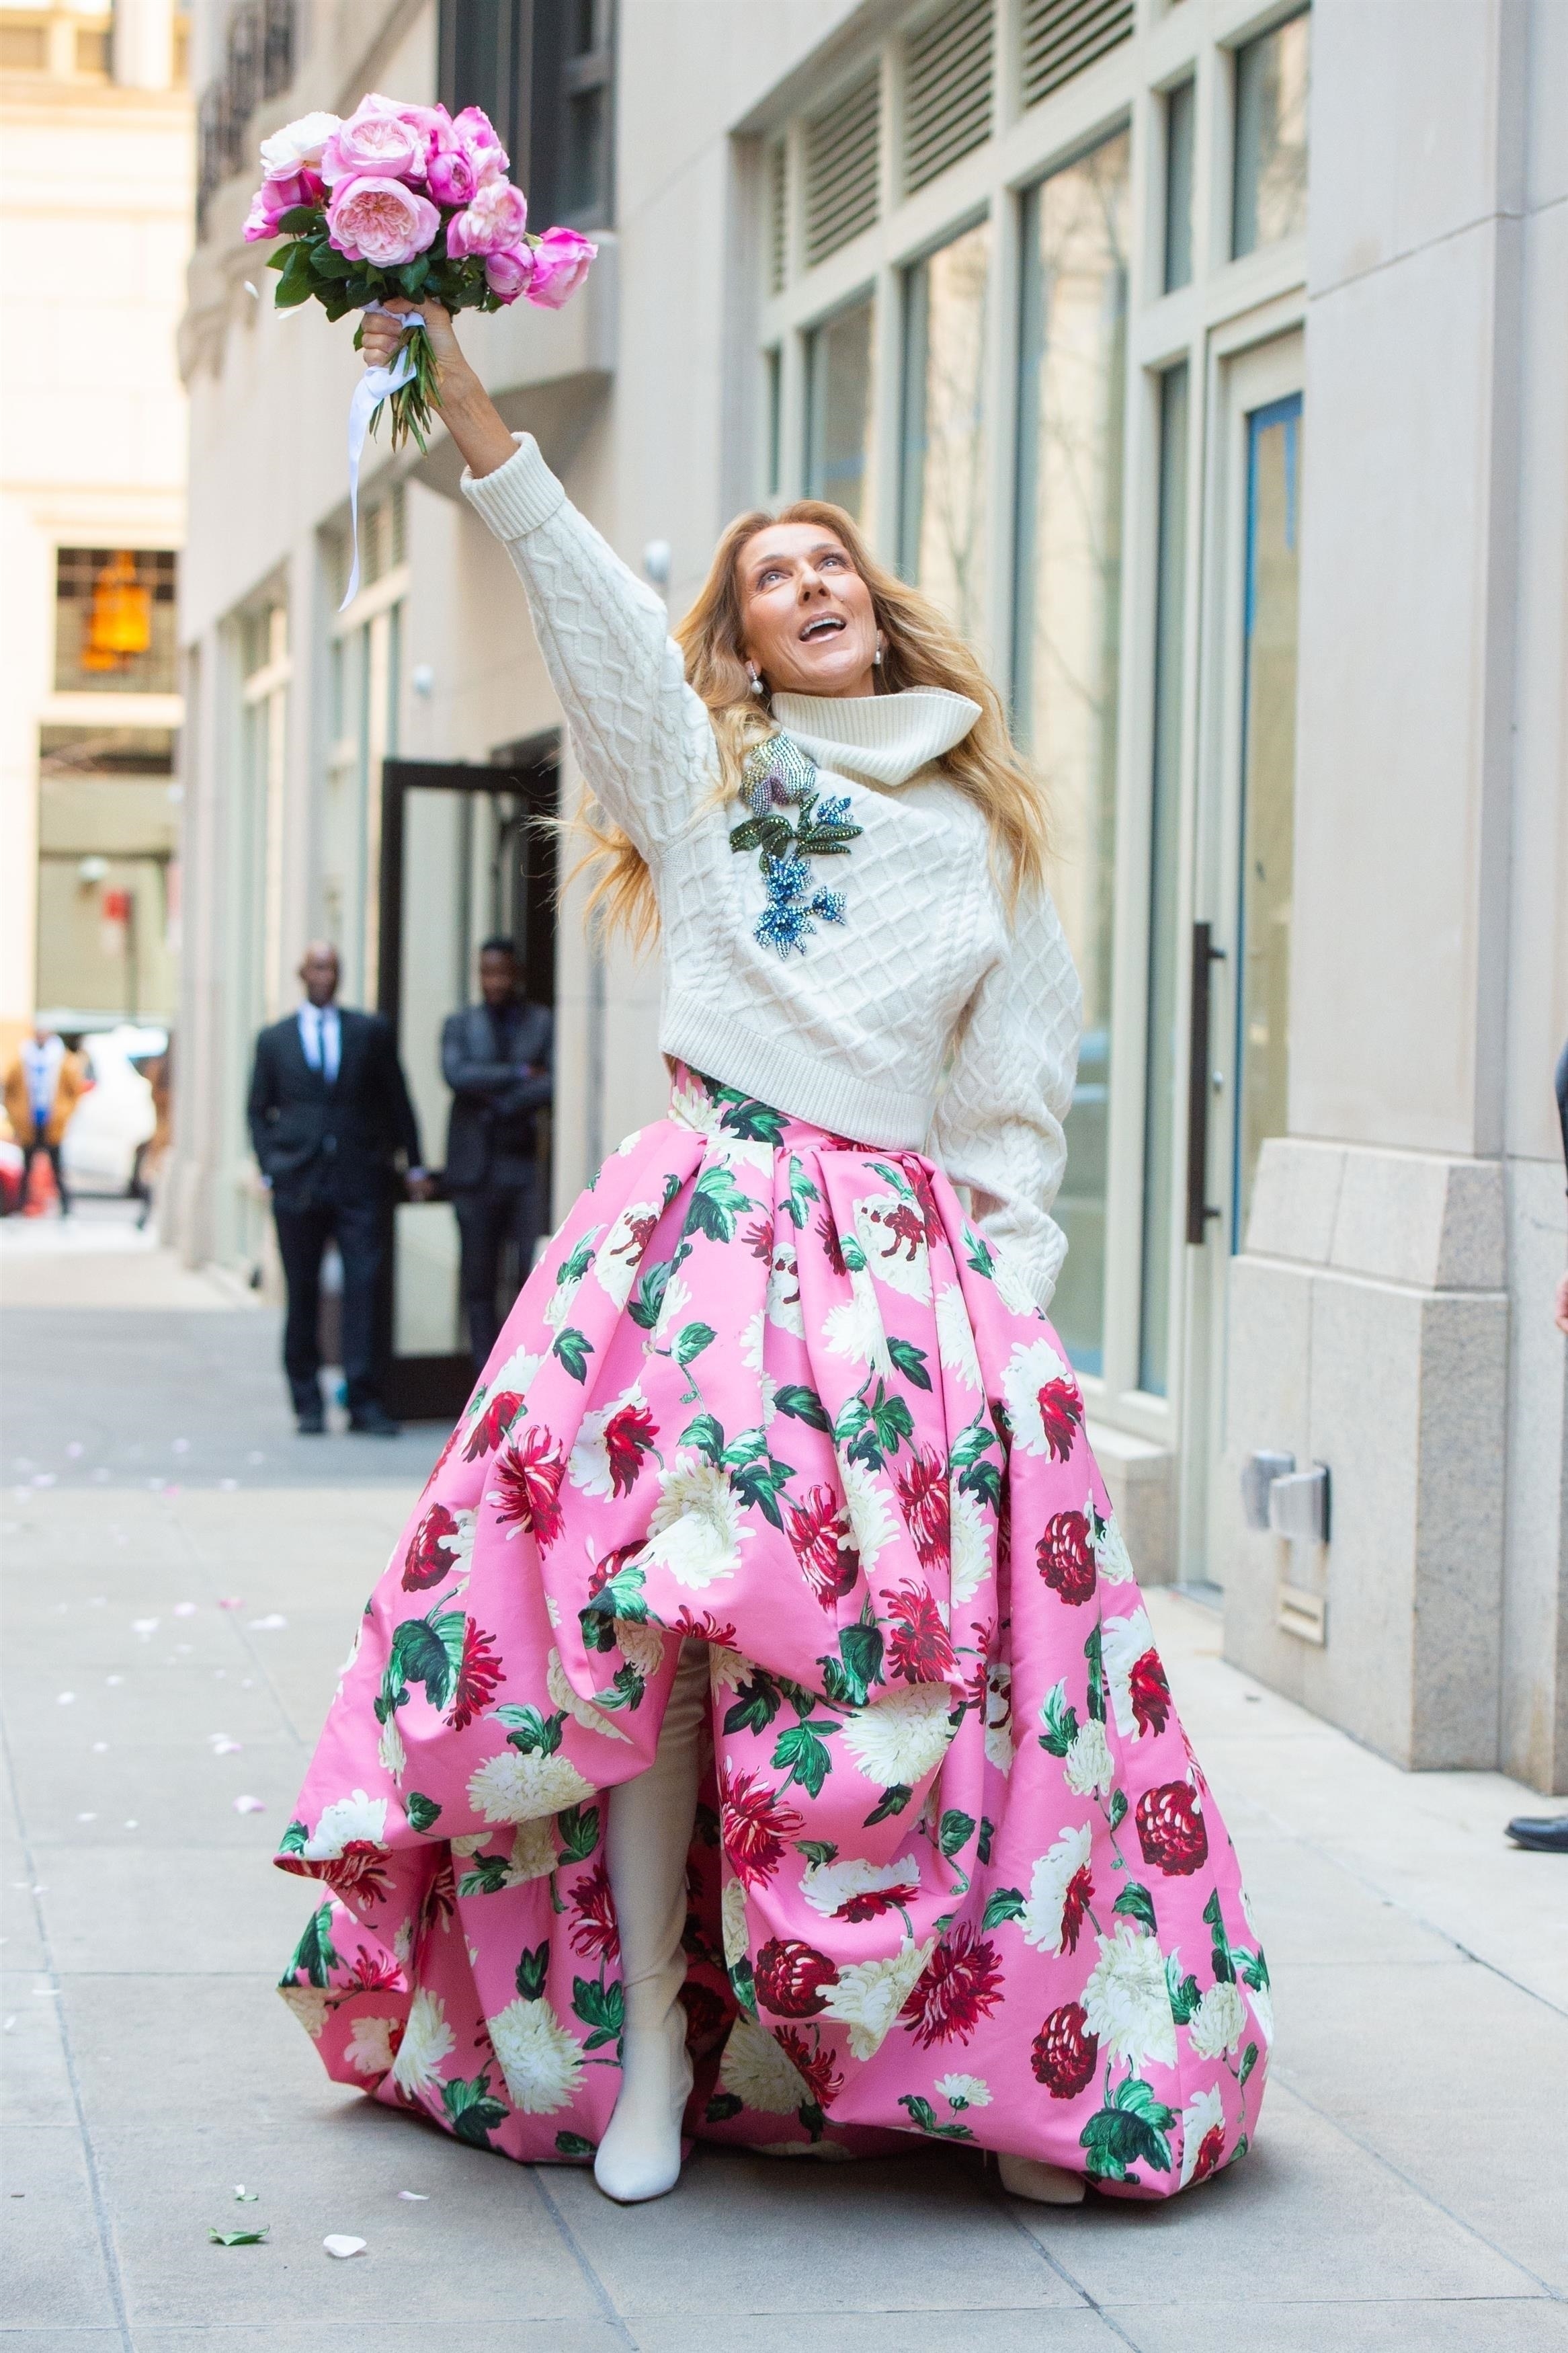 Céline Dion Posing On The Street Is Exactly What I Need Right Now